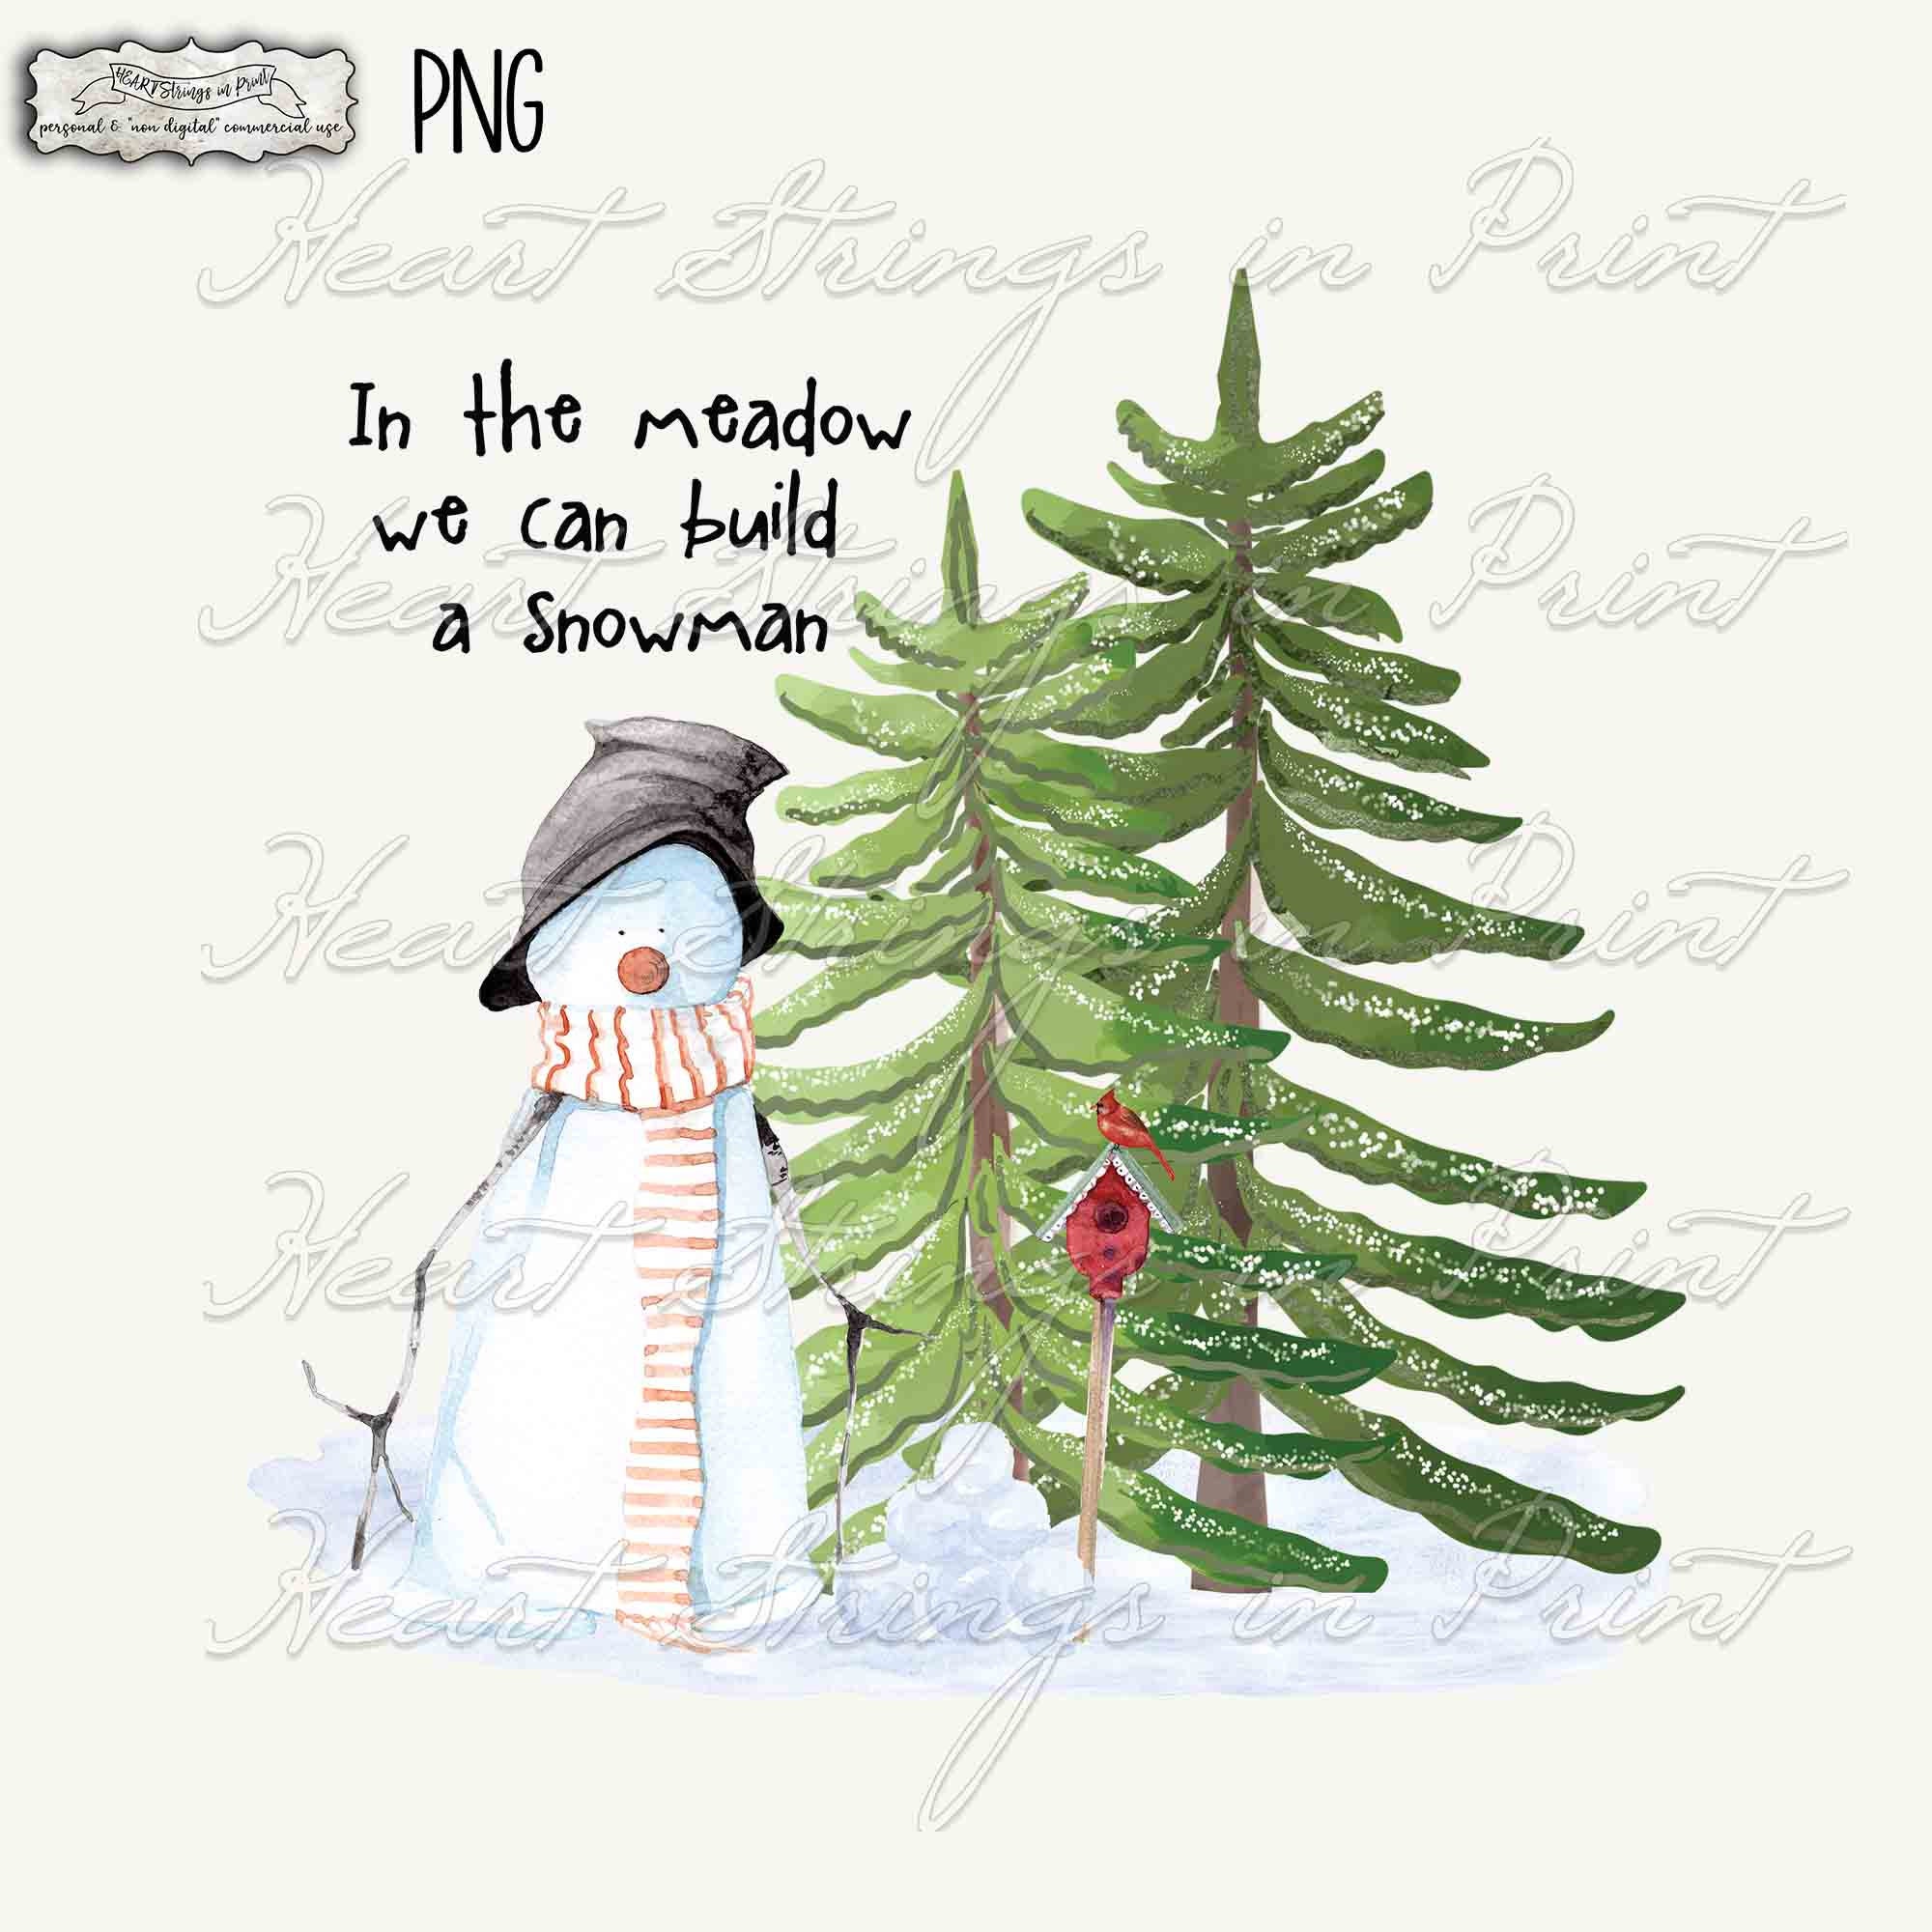 REDI2CRAFT Holiday Art Series 7.5 in. x 7.5 in. x 3.125 in. Wave Glass Block for Arts and Crafts with Snowman Theme